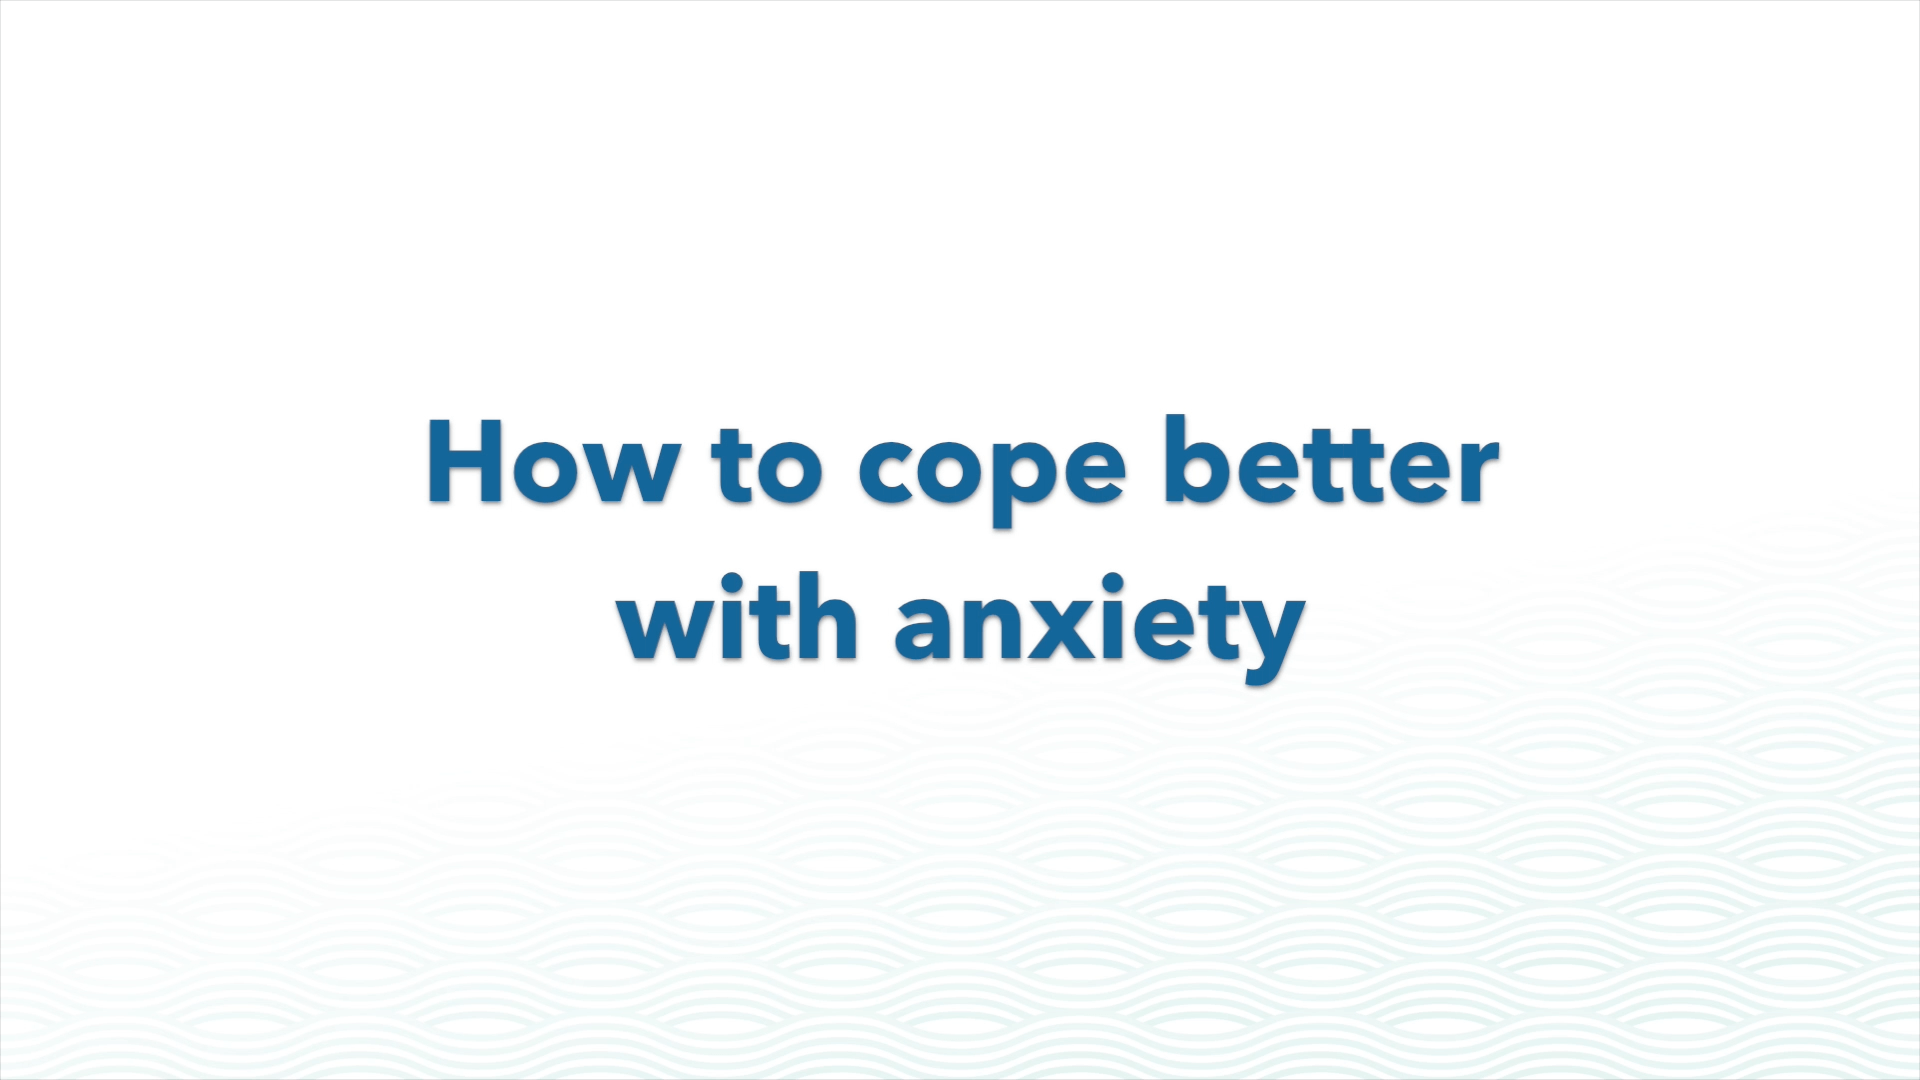 How to cope better with anxiety